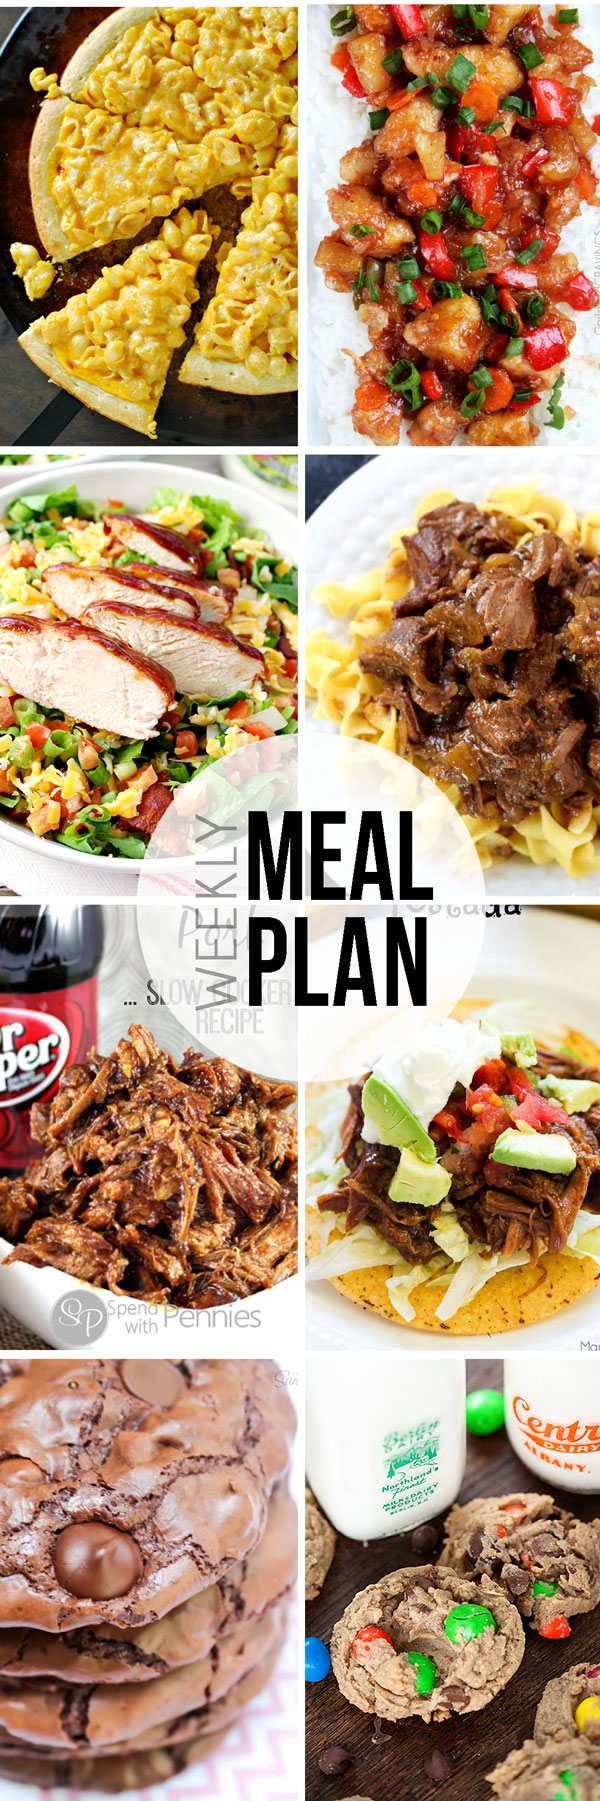 Easy Meal Plan Sunday #8.